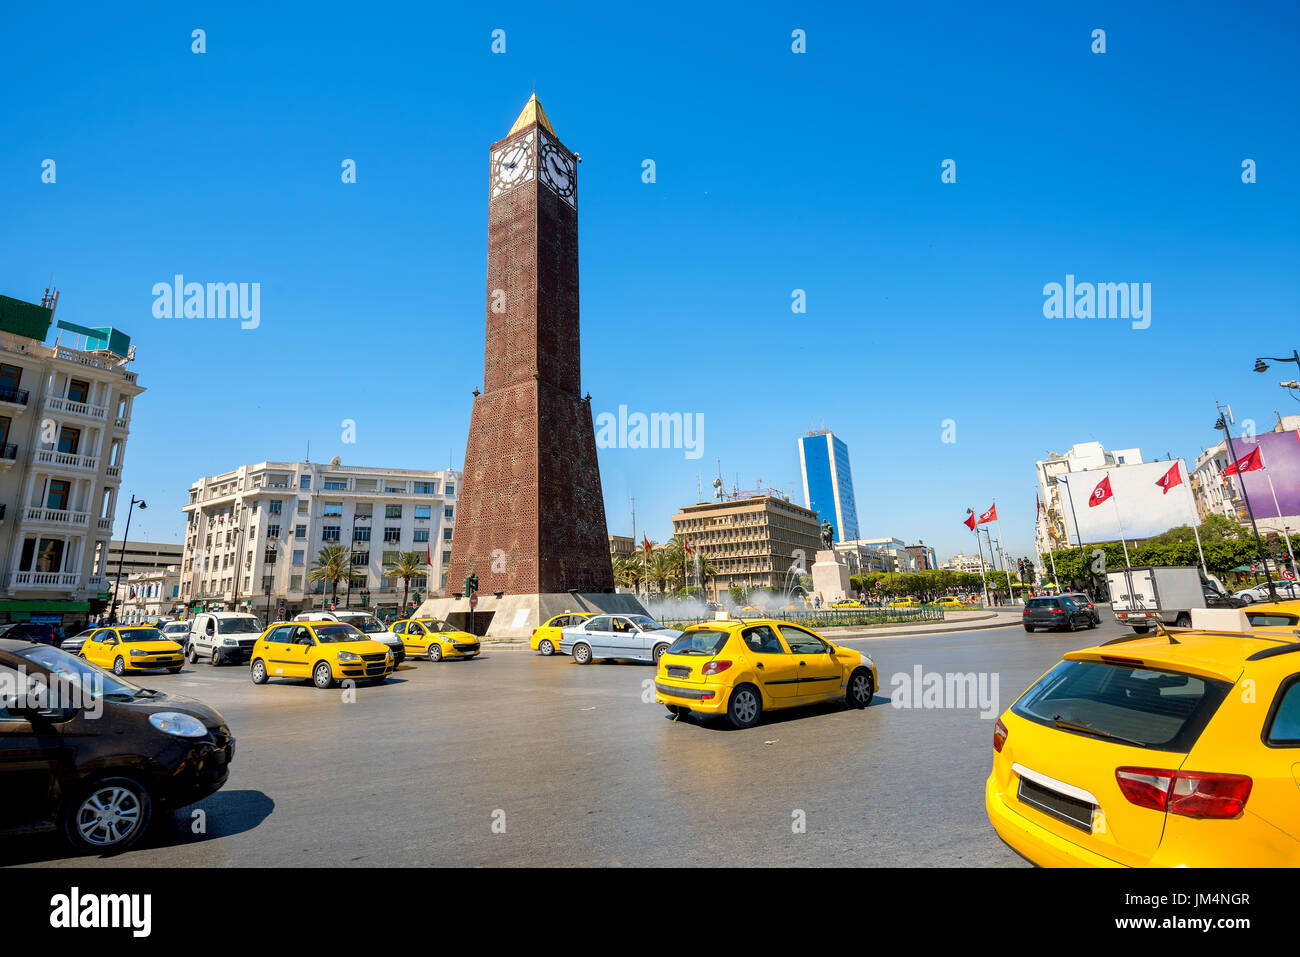 Famous clock tower on central square in Tunis city. Tunisia, North Africa Stock Photo